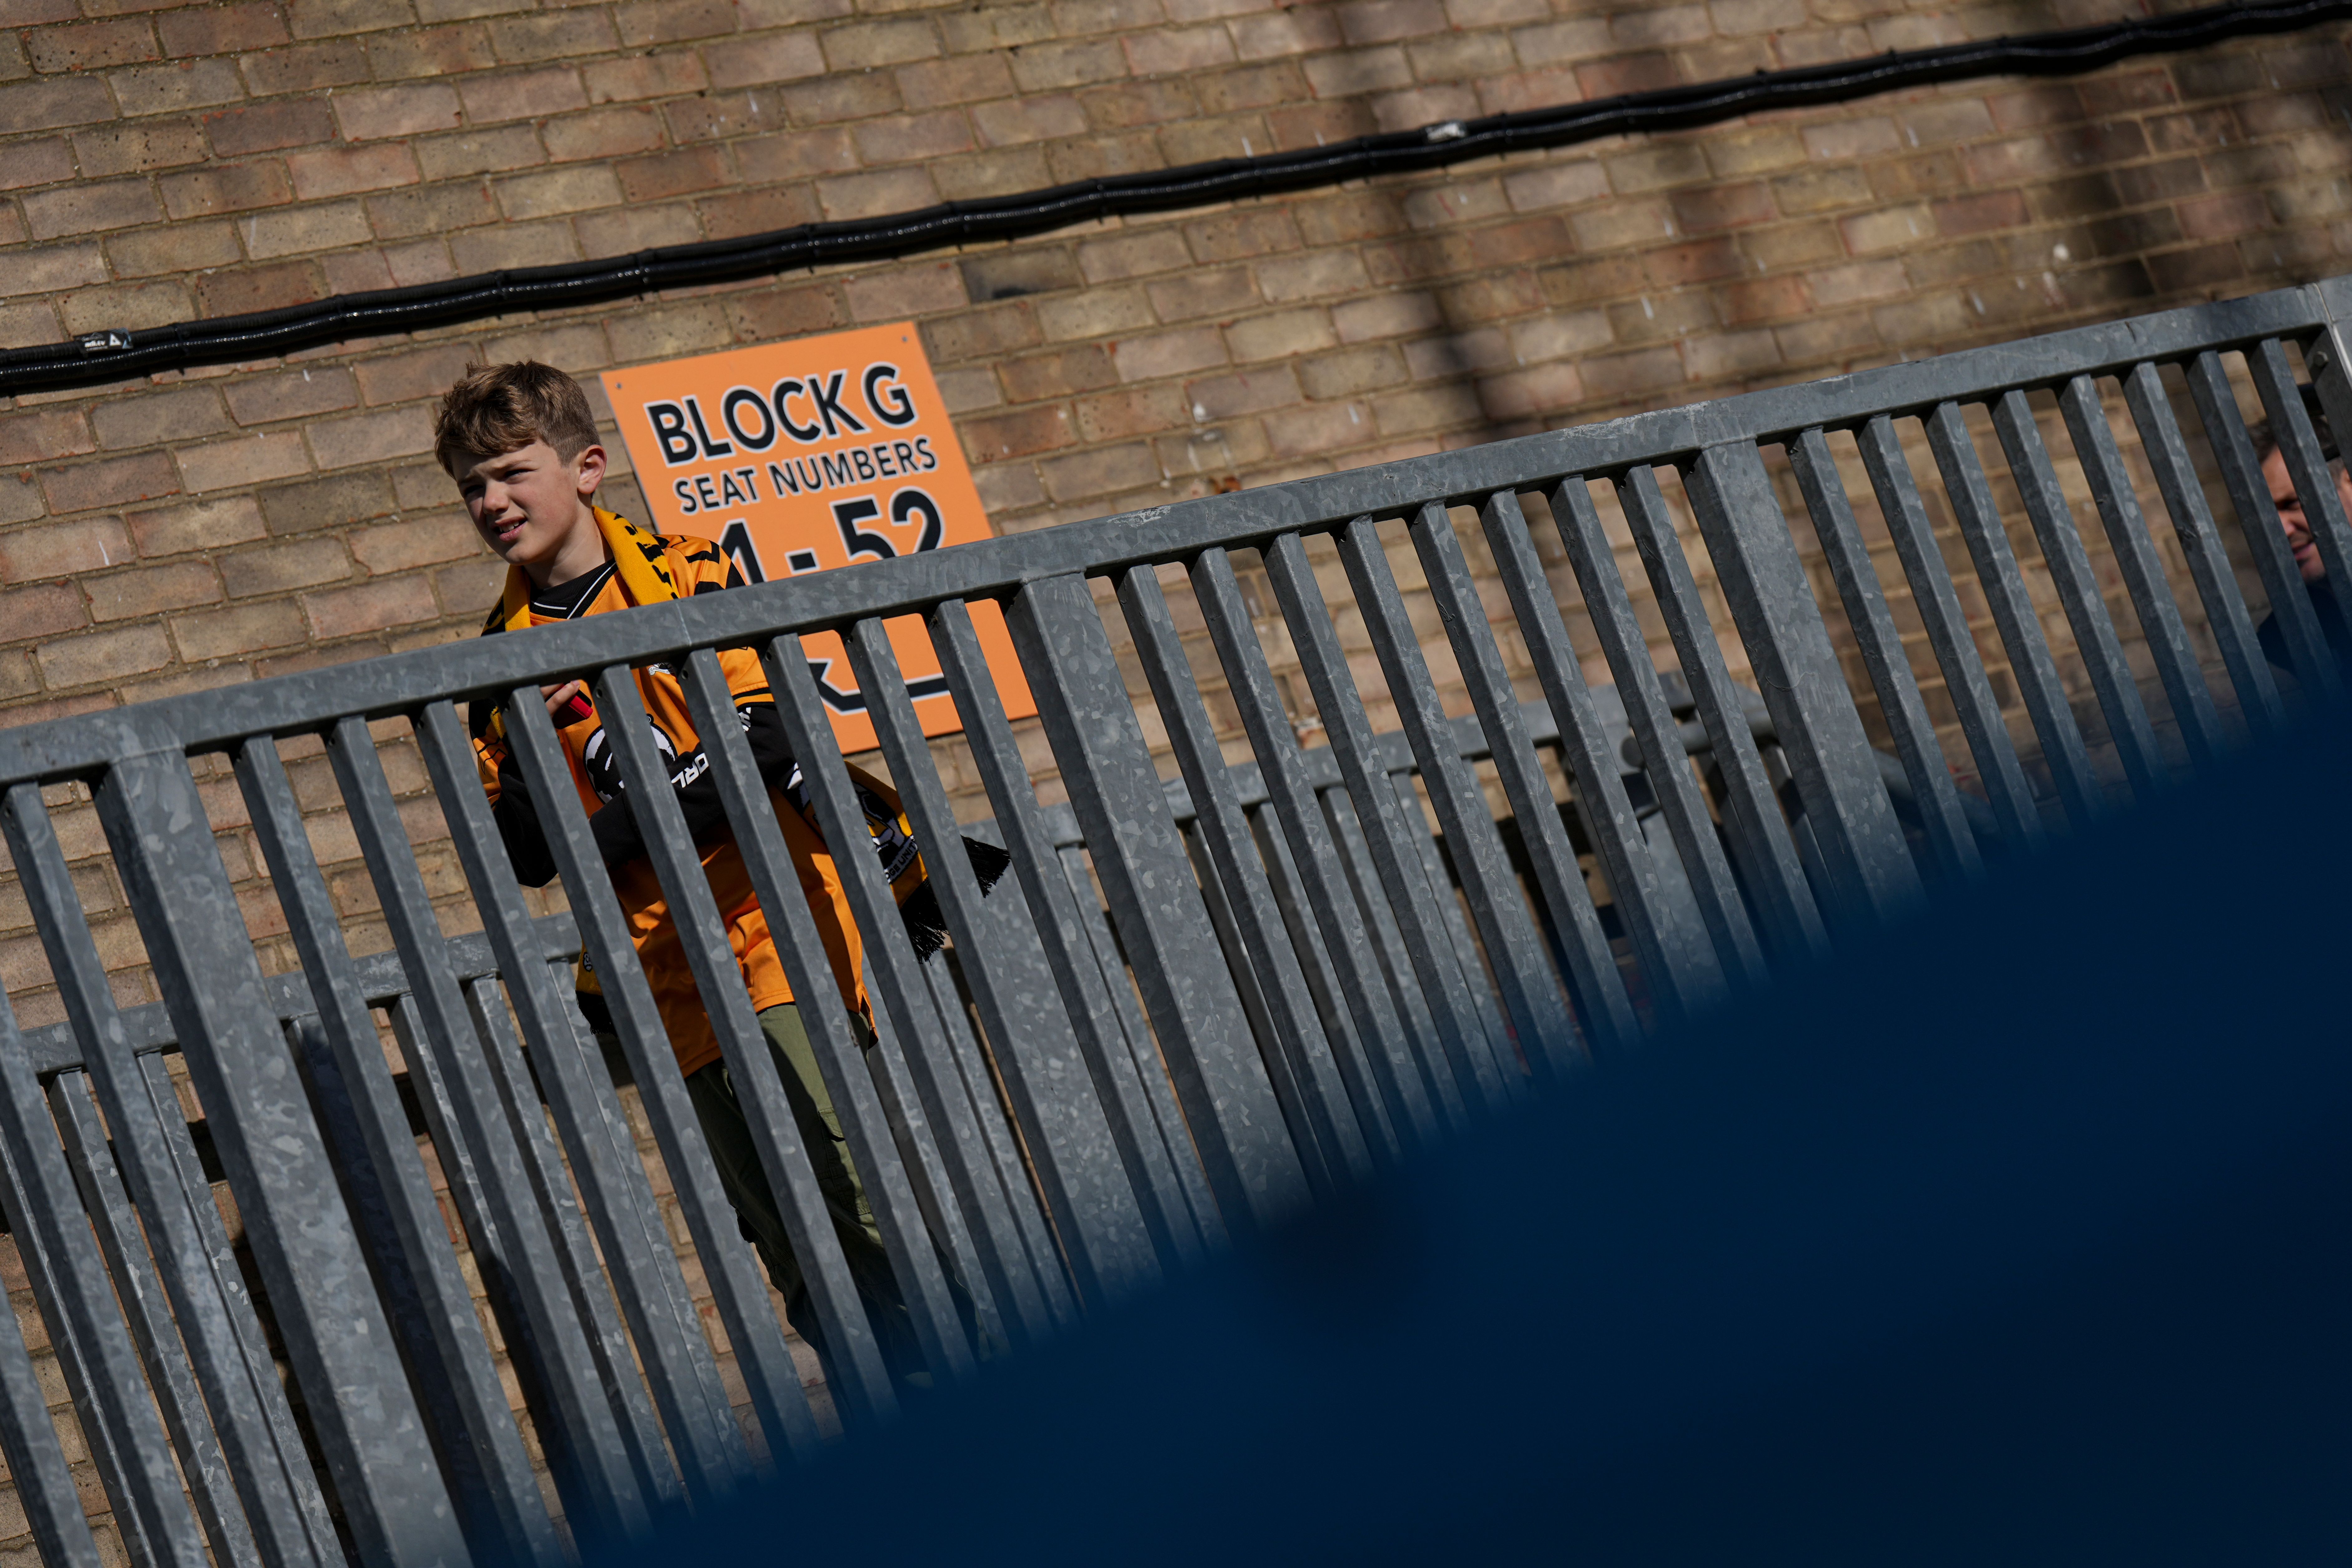 A young supporter makes his way inside the Cledara Abbey Stadium